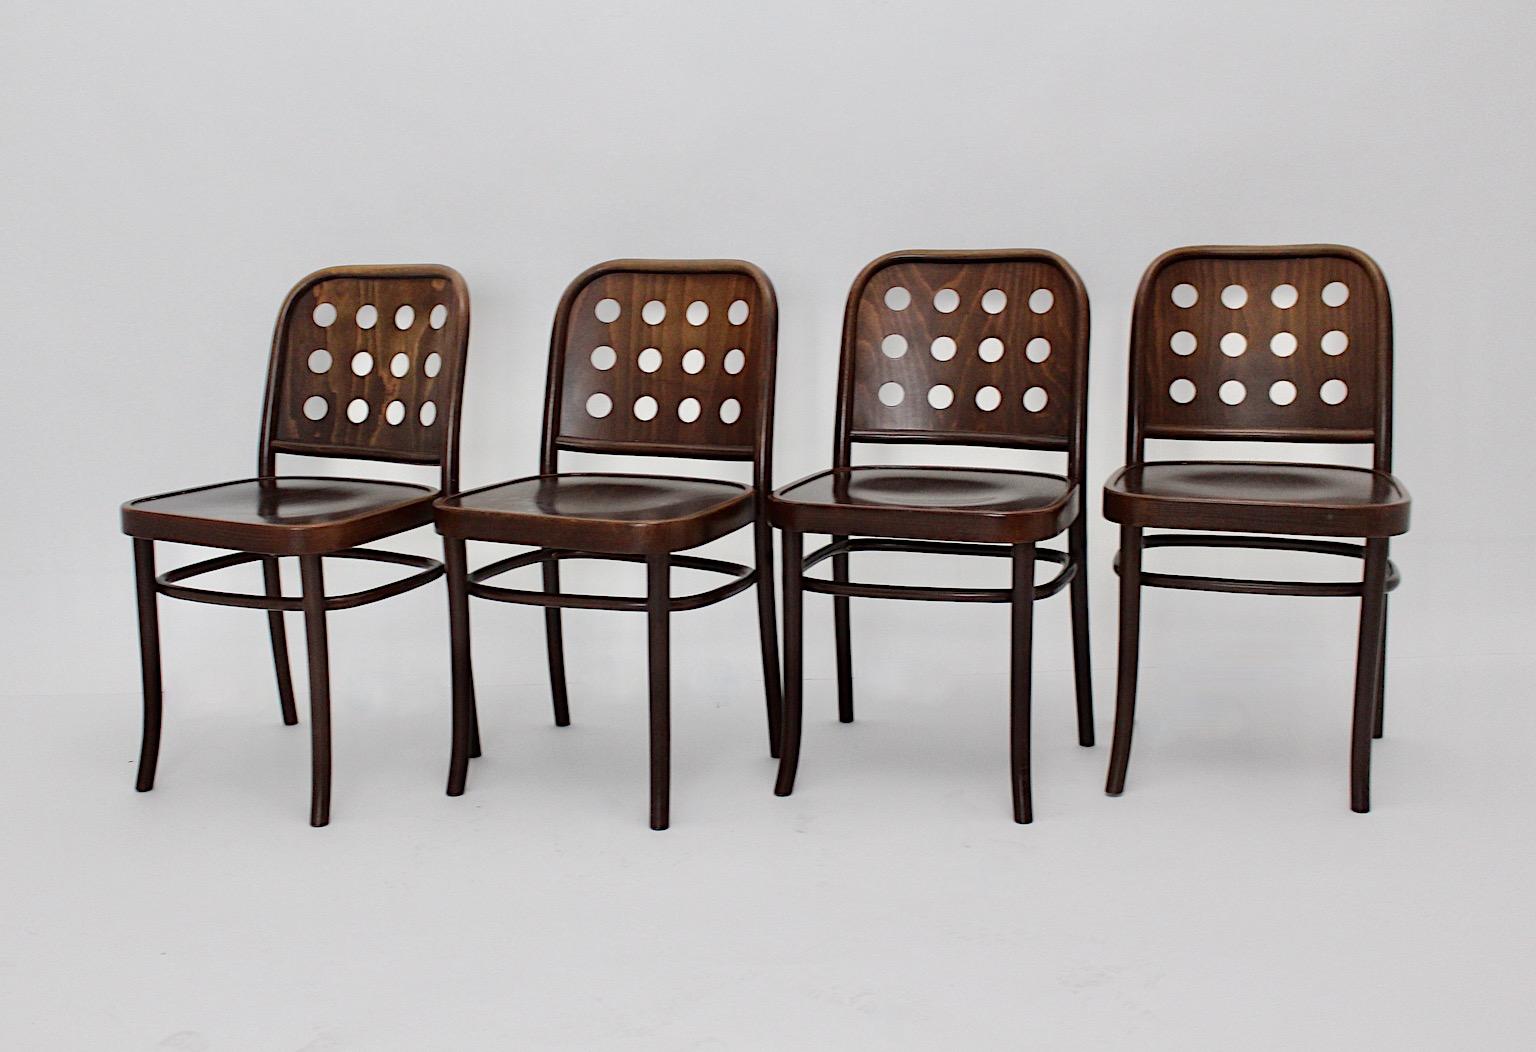 A brown vintage set of 4 dining chairs beech style Josef Hoffmann, which were made in 1990s.
The Chairs were made out of brown stained and colorless lacquered bentwood and plywood.
While the backseat shows an interesting form with significant 12